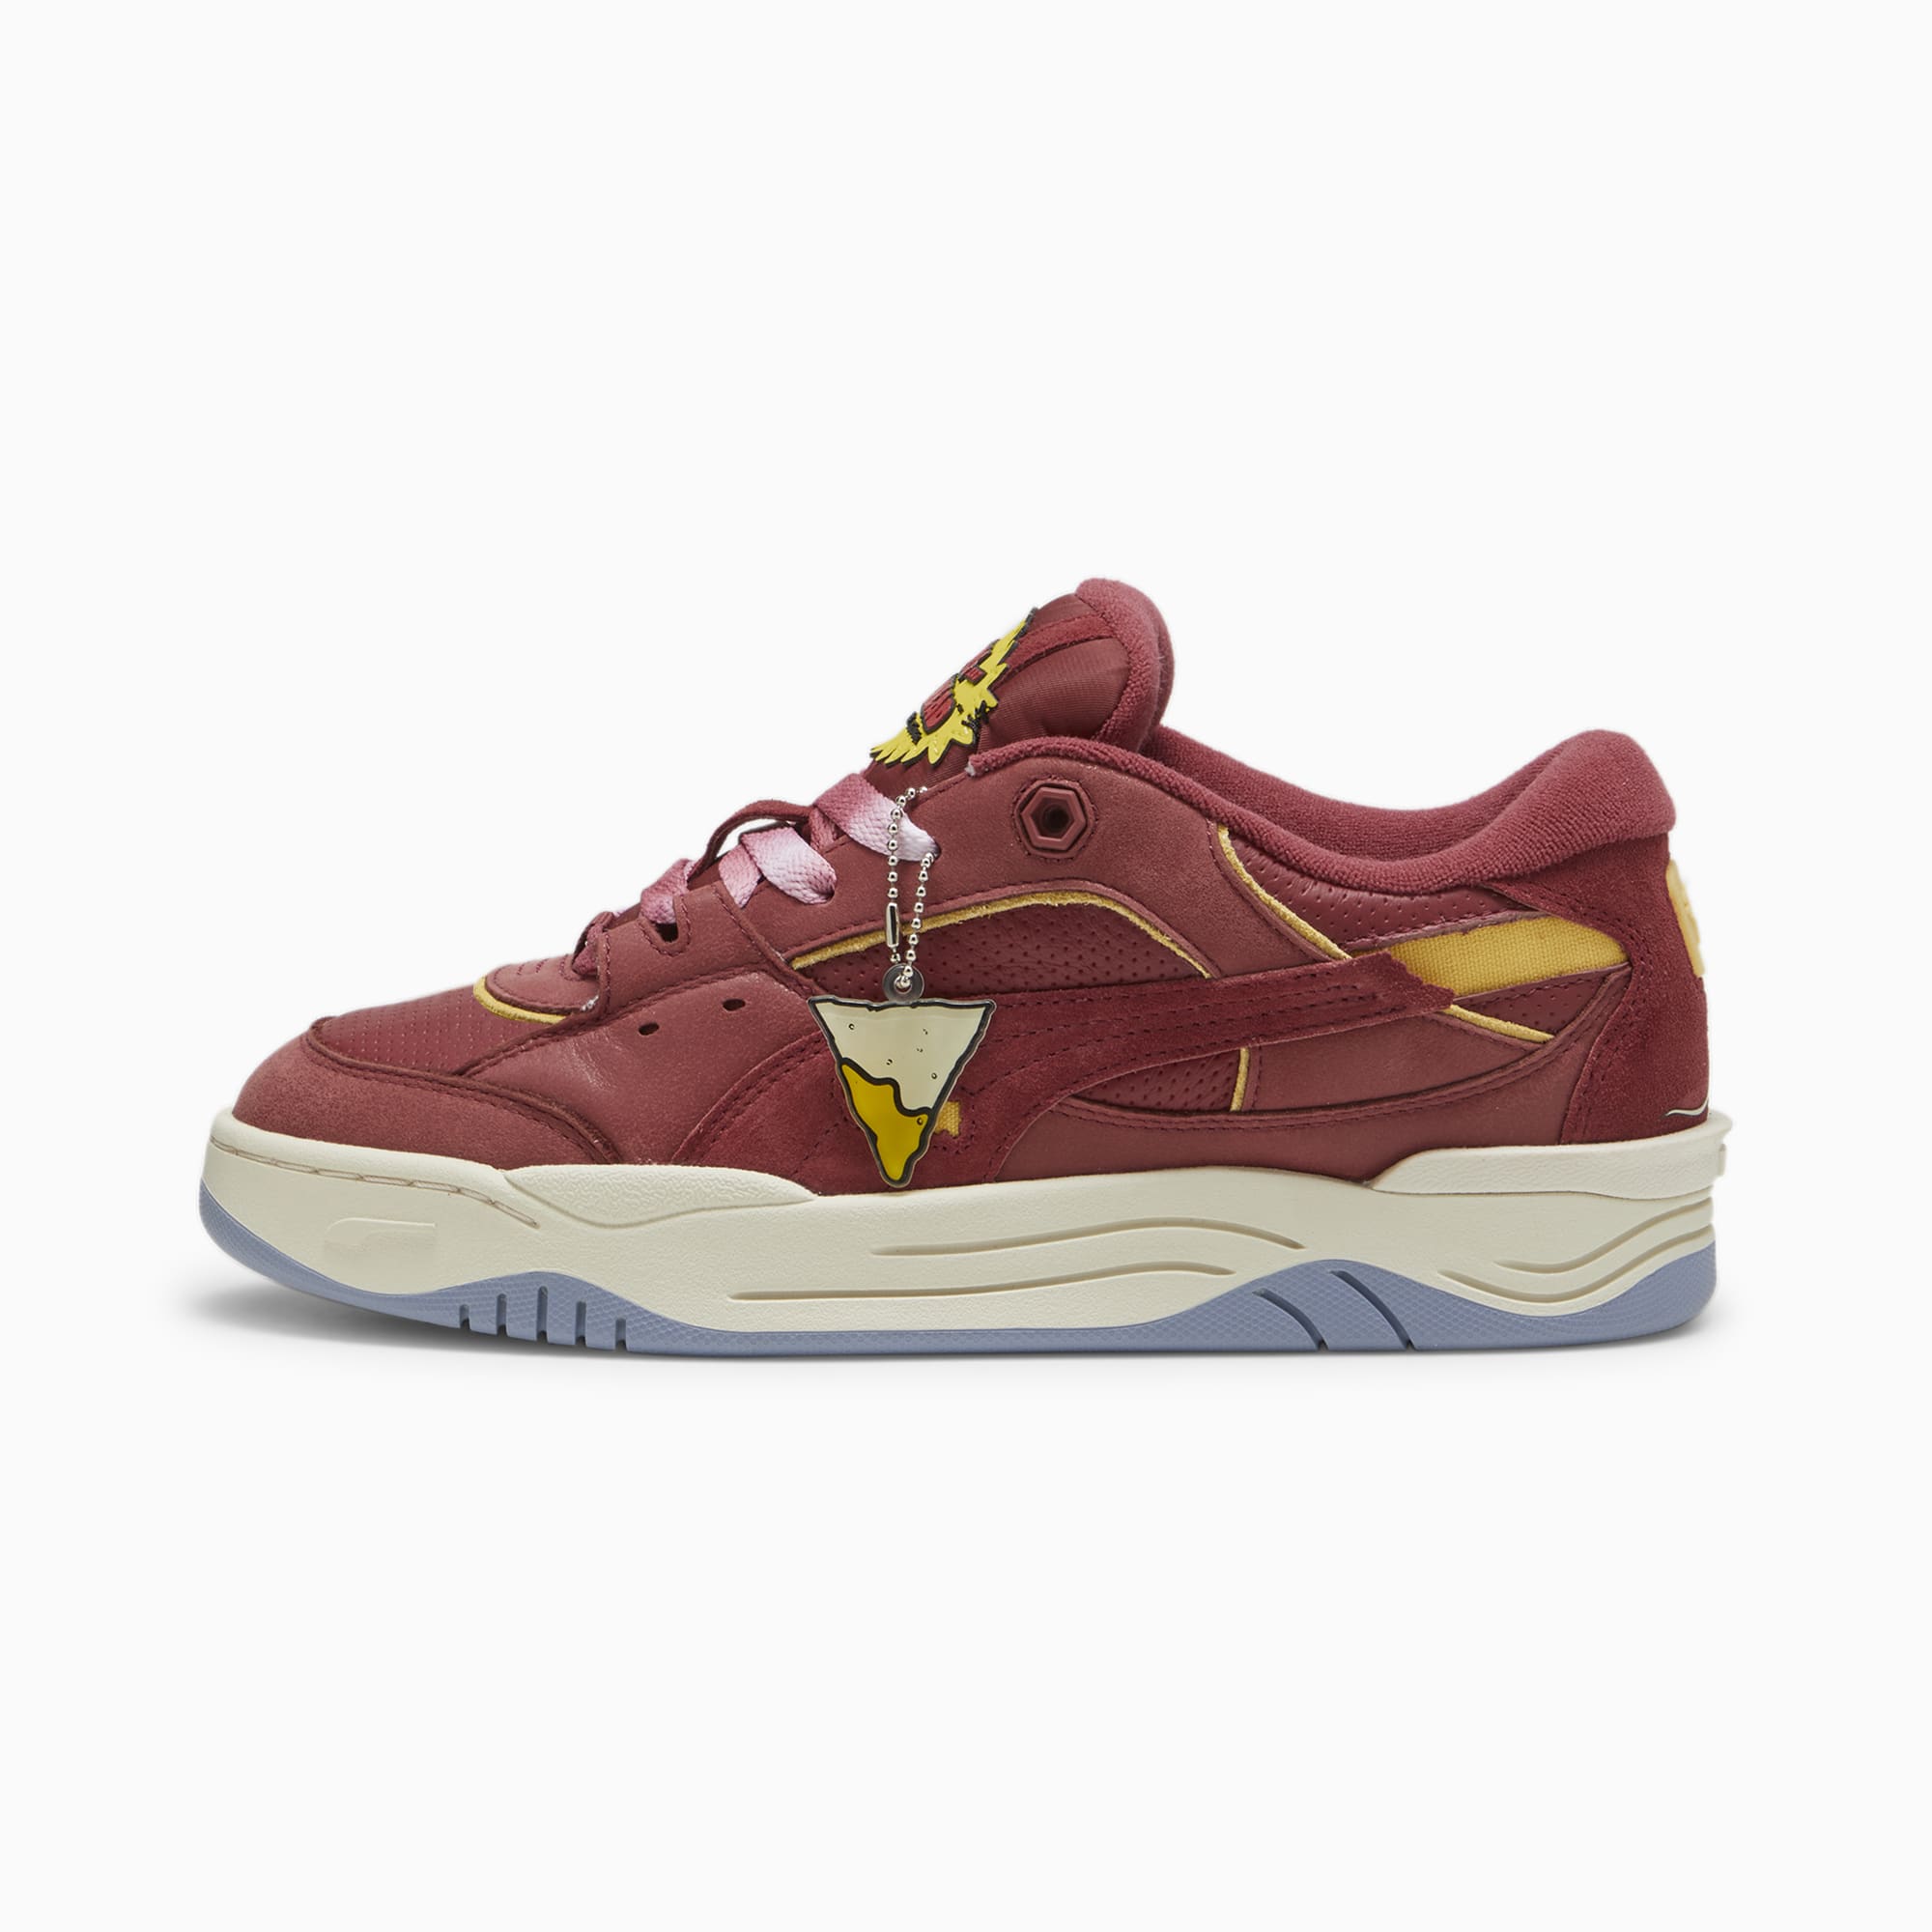 Chaussure Sneakers PUMA-180 PUMA X BEAVIS AND BUTTHEAD Pour Femme